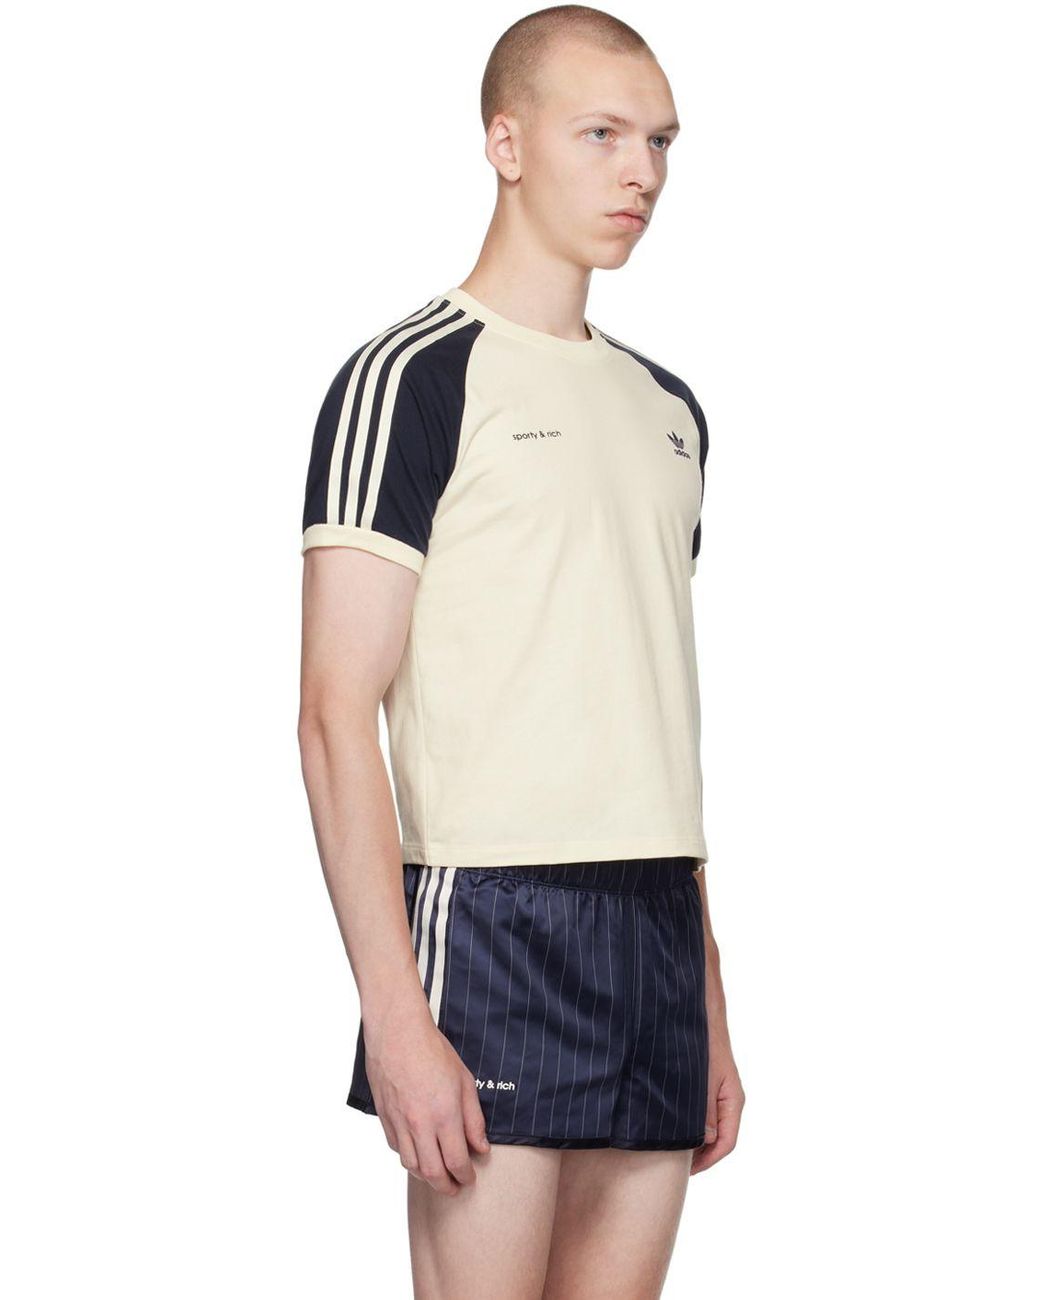 Sporty & Rich Off-white Adidas Originals Edition T-shirt in Black